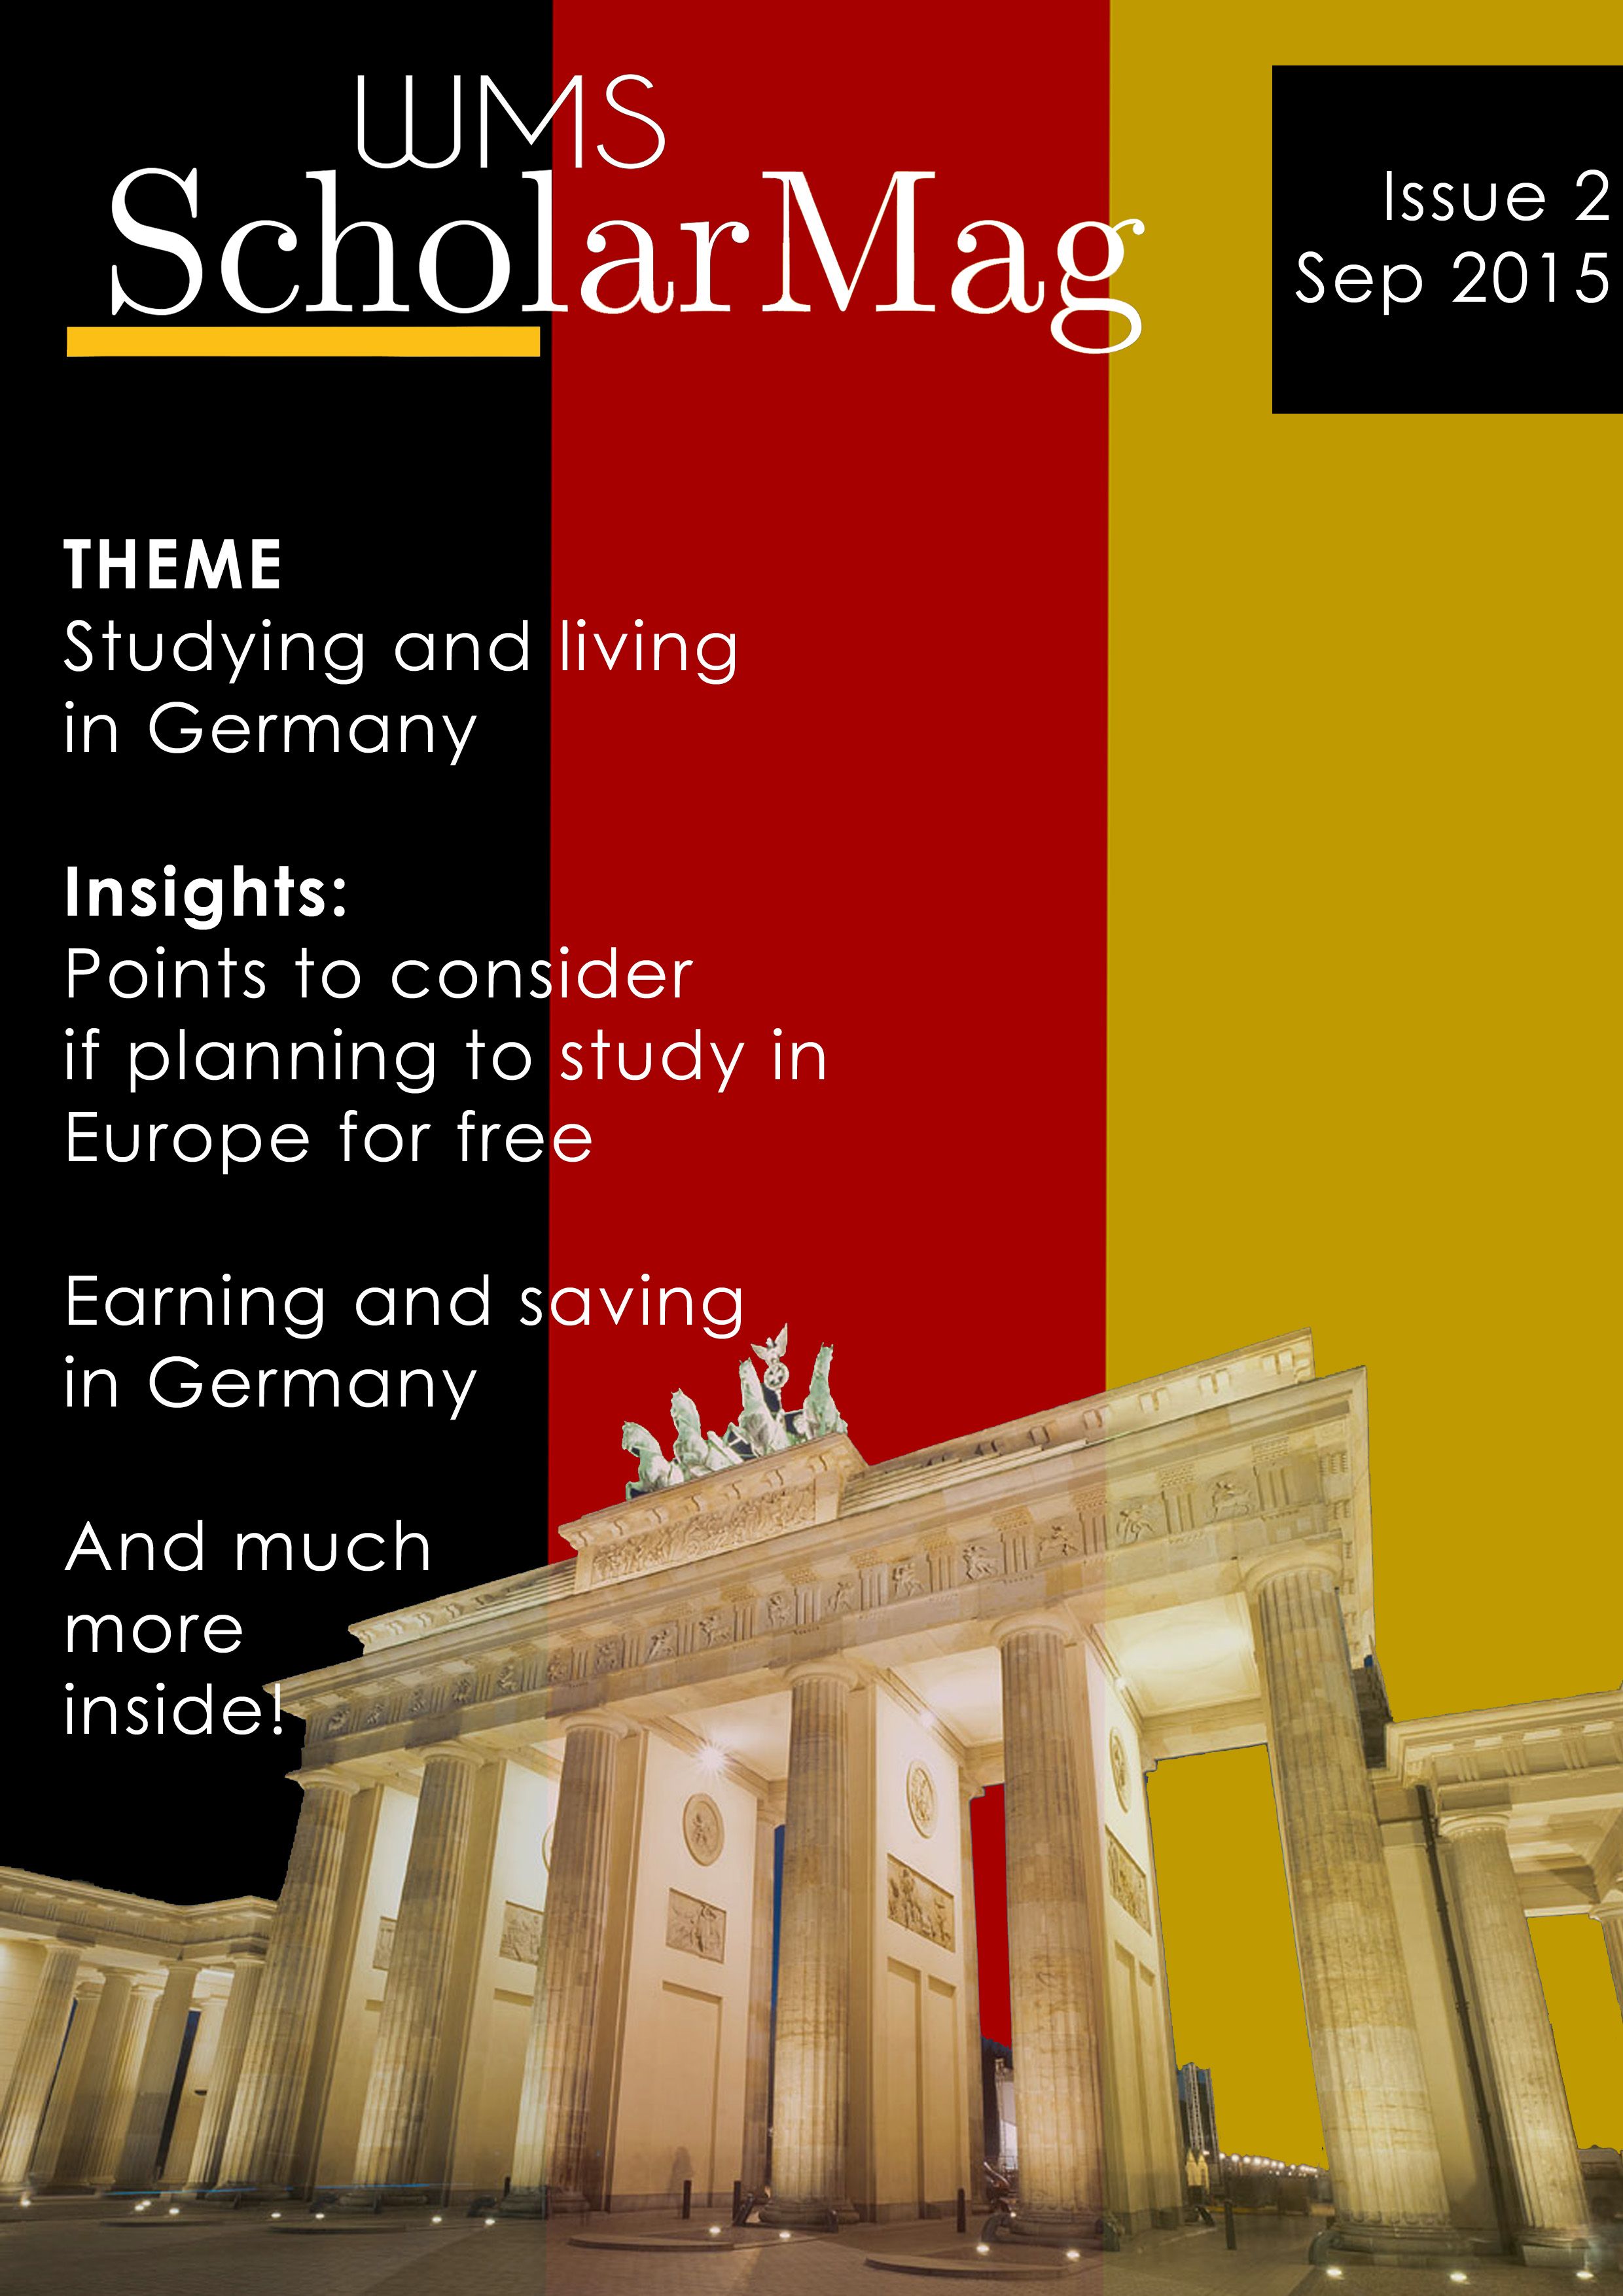 How to get free education and scholarships in germany 